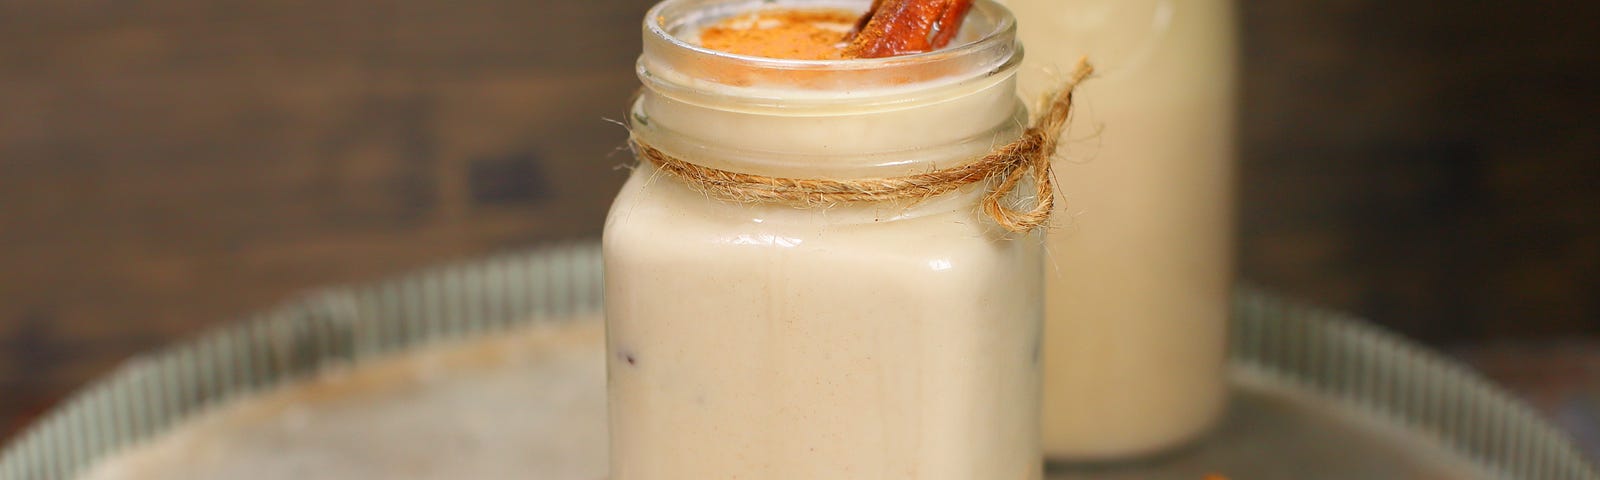 Easy, homemade, refreshing dairy-free horchata in a glass with cinnamon and rice